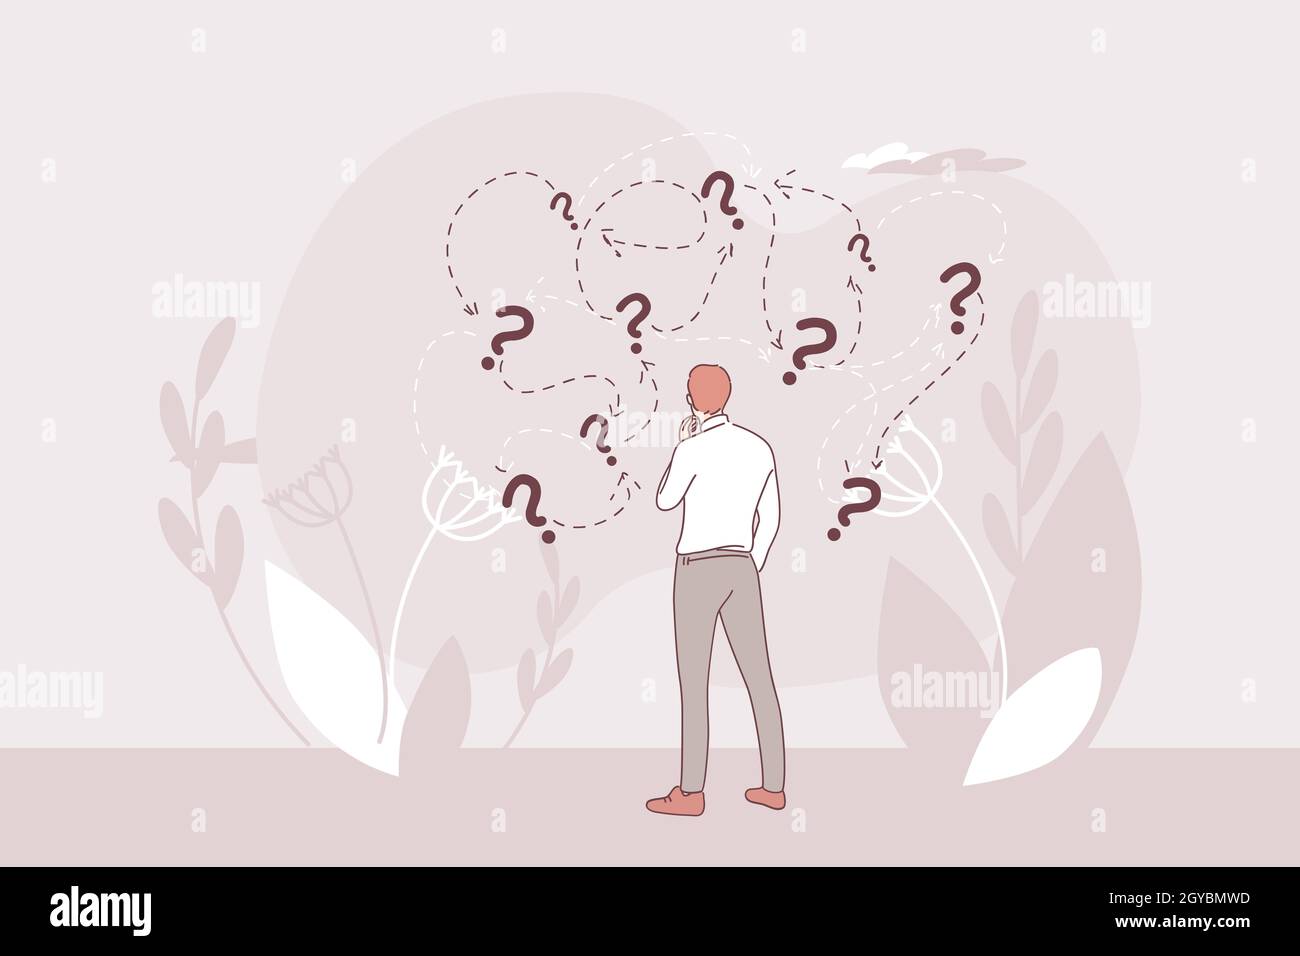 Making decision about strategy and business development way concept. Businessman cartoon character standing and ,akin right solution directions for qu Stock Photo